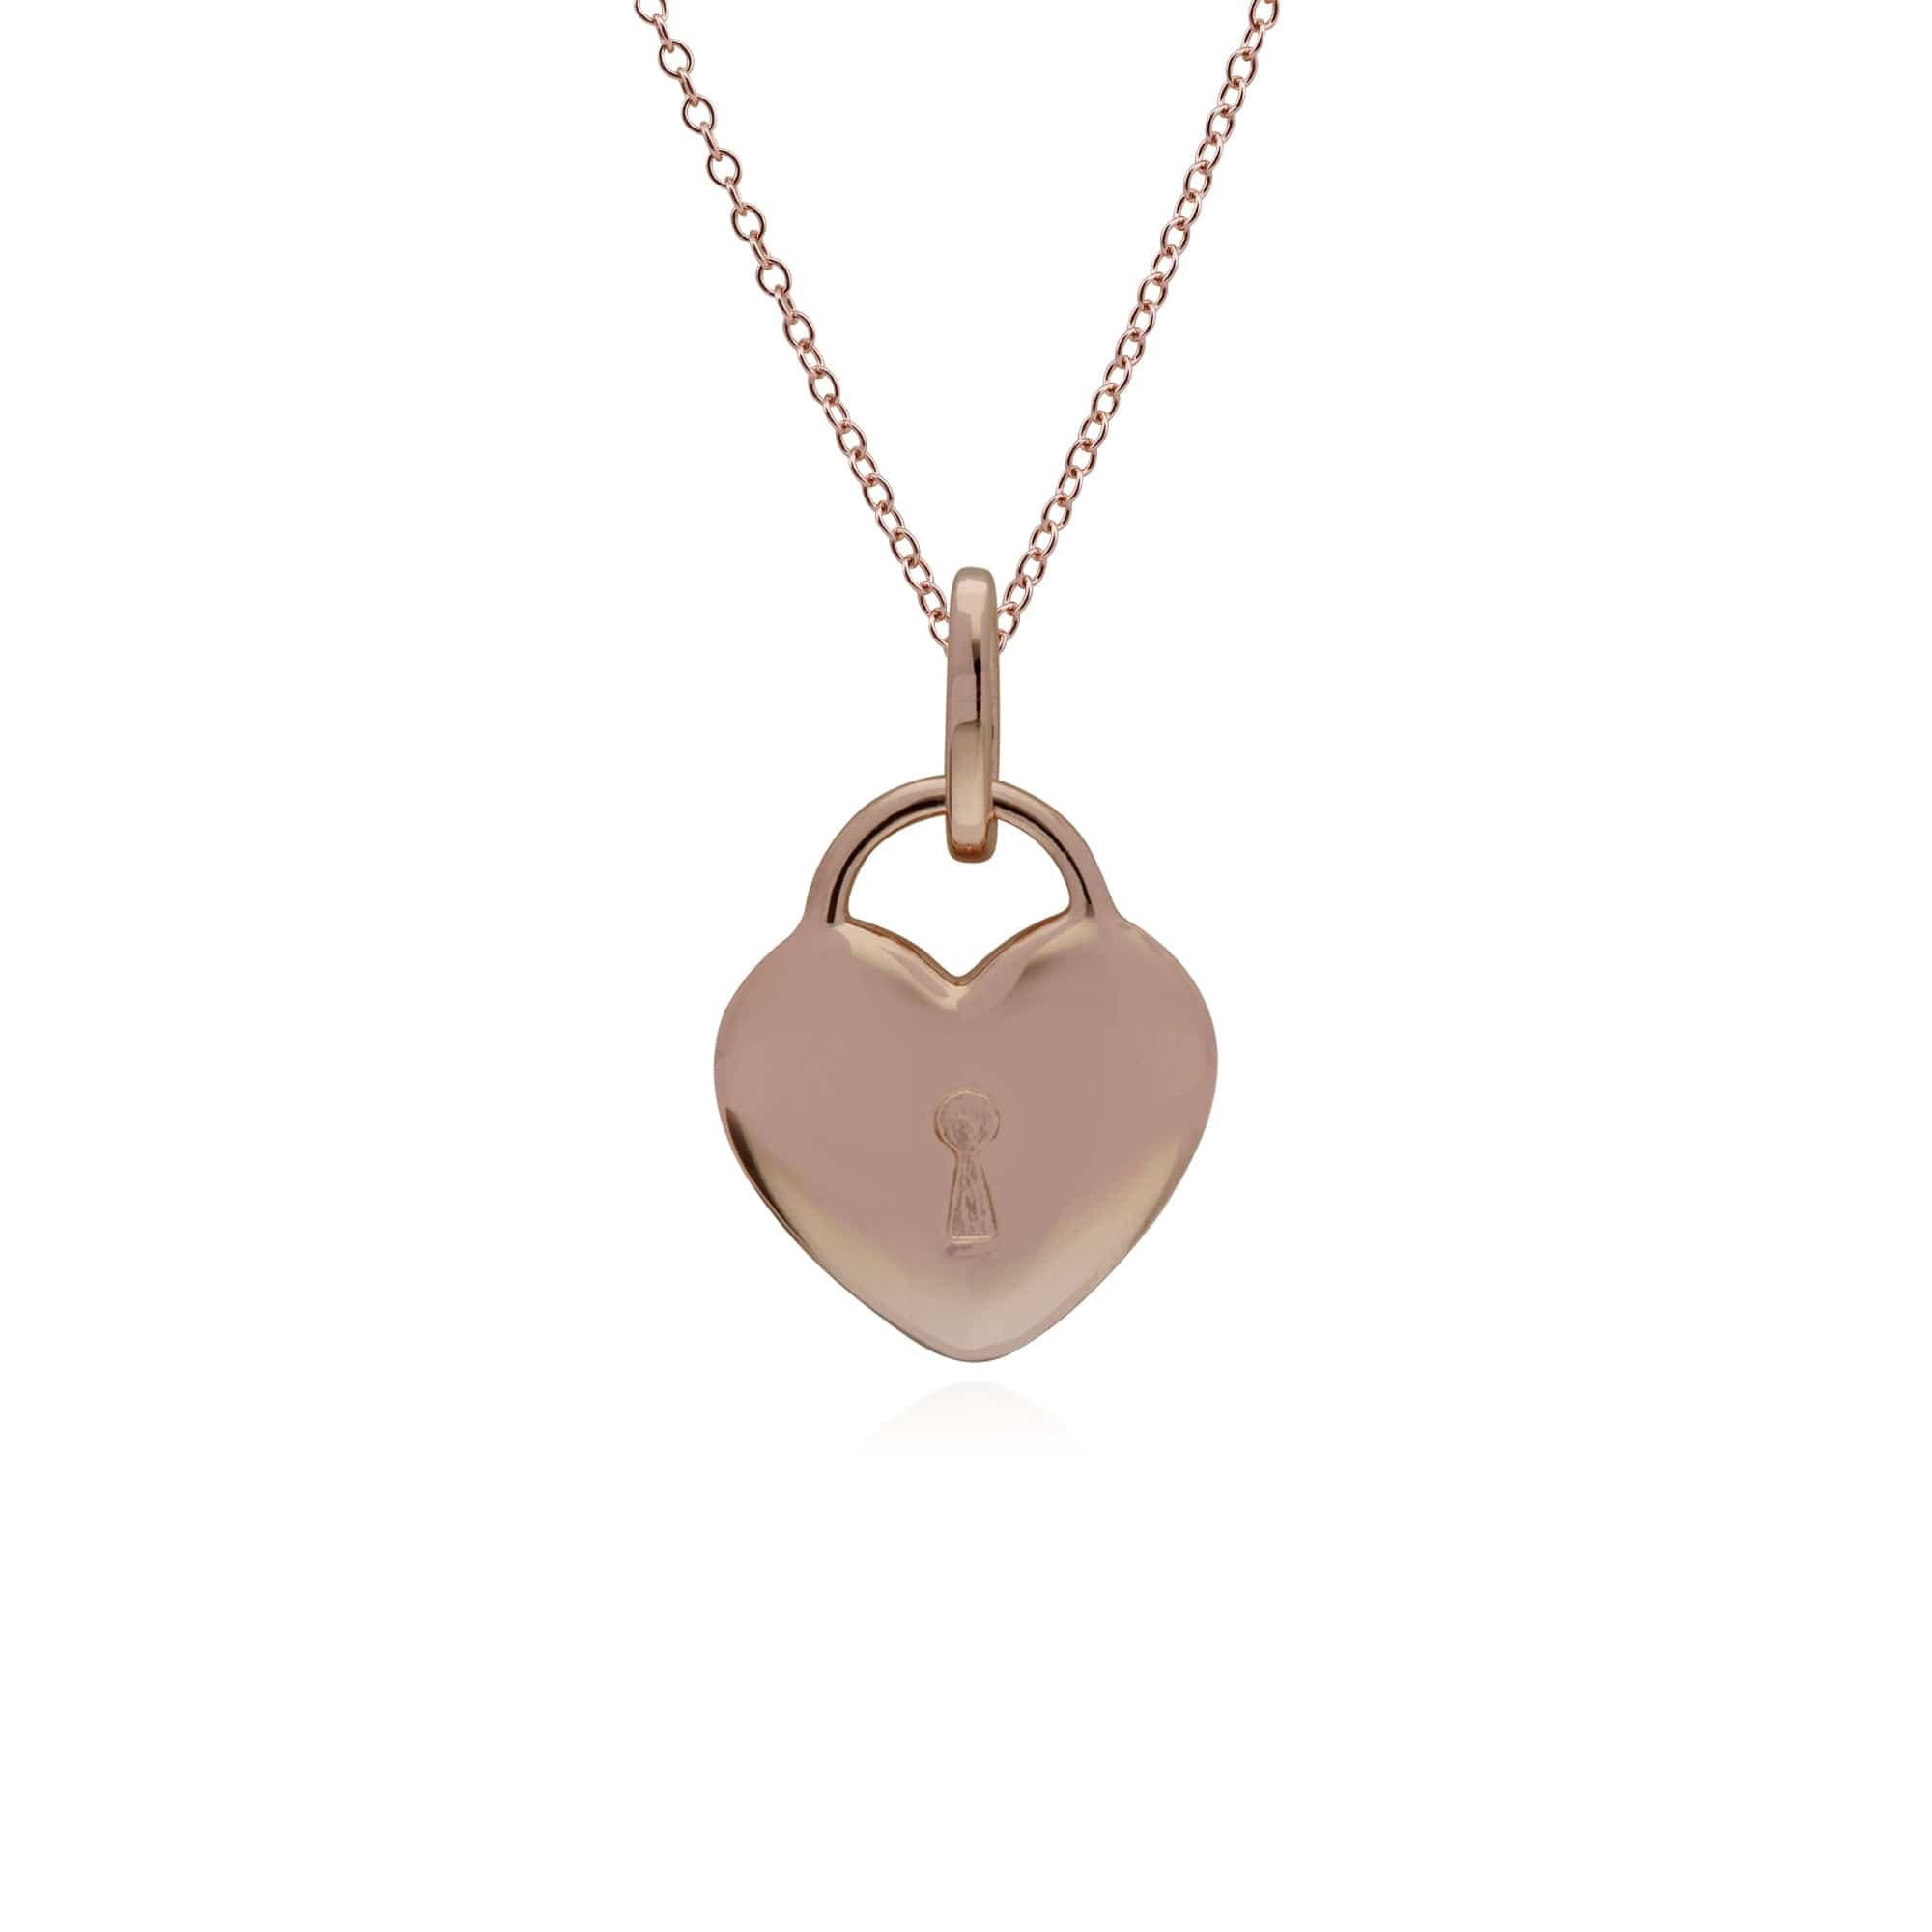 270P026101925-270P026901925 Classic Heart Lock Pendant & Pearl Big Key Charm in Rose Gold Plated 925 Sterling Silver 3